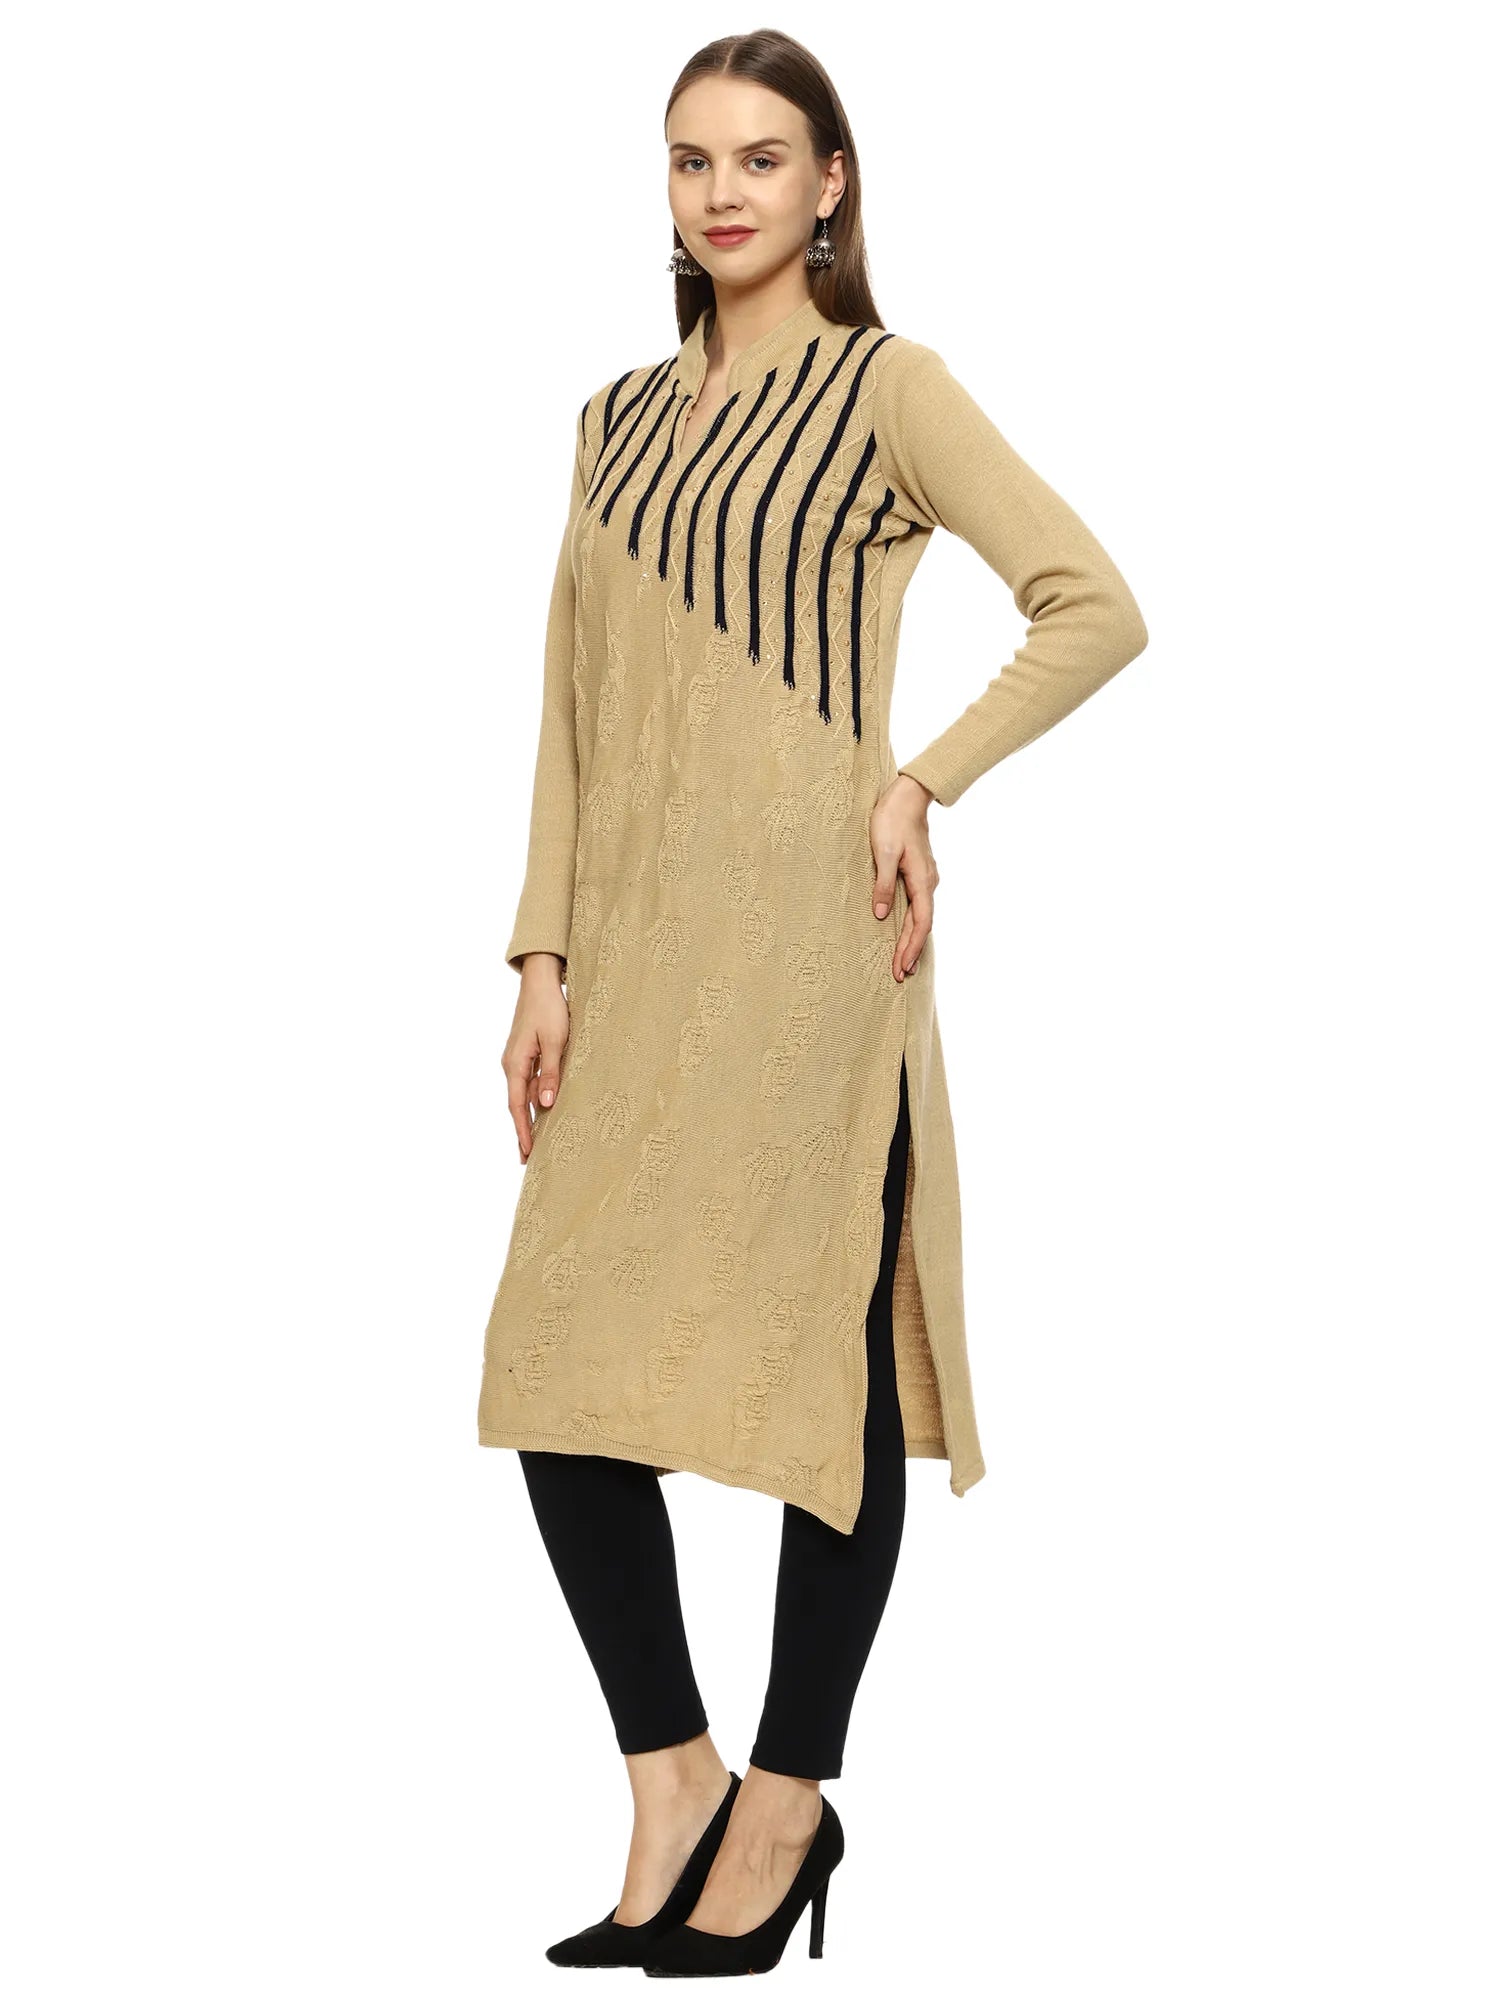 MAGKNIT Woollen Knee Length Designer Knitted Kurti for Women 4 Pink :  Amazon.in: Fashion